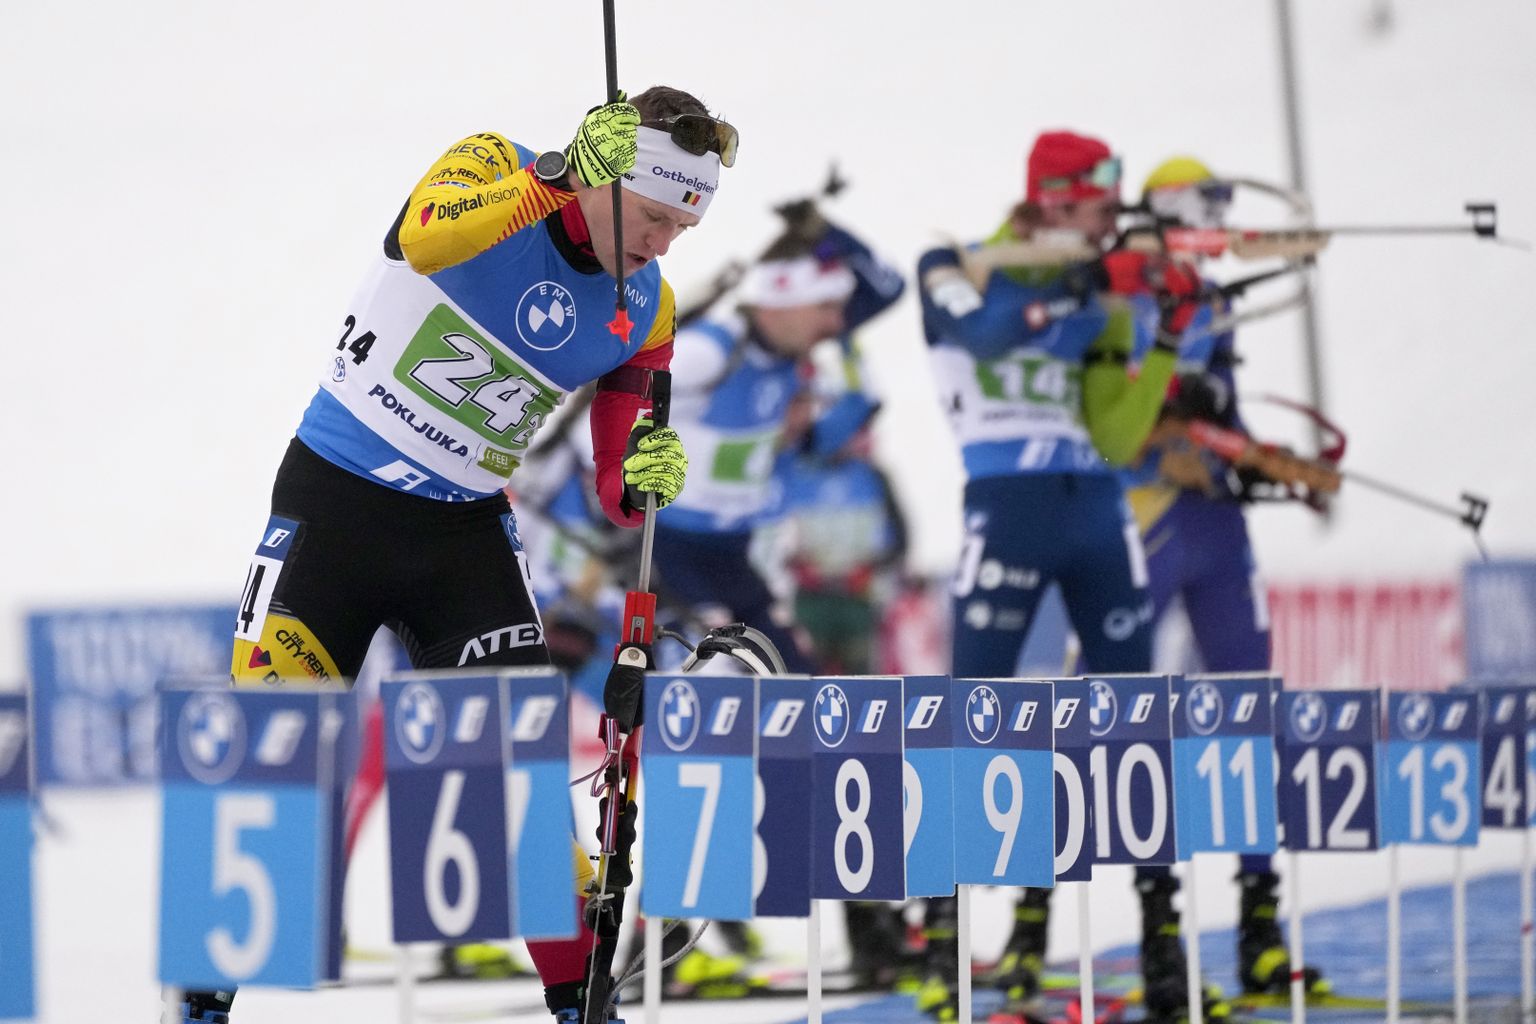 Thierry Langer, of Belgium, tries to fix a problem with his rifle during the Mixed Relay competition at the Biathlon World Cup event in Pokljuka, Slovenia, Sunday, Jan. 8, 2023. (AP Photo/Darko Bandic)  XAF148